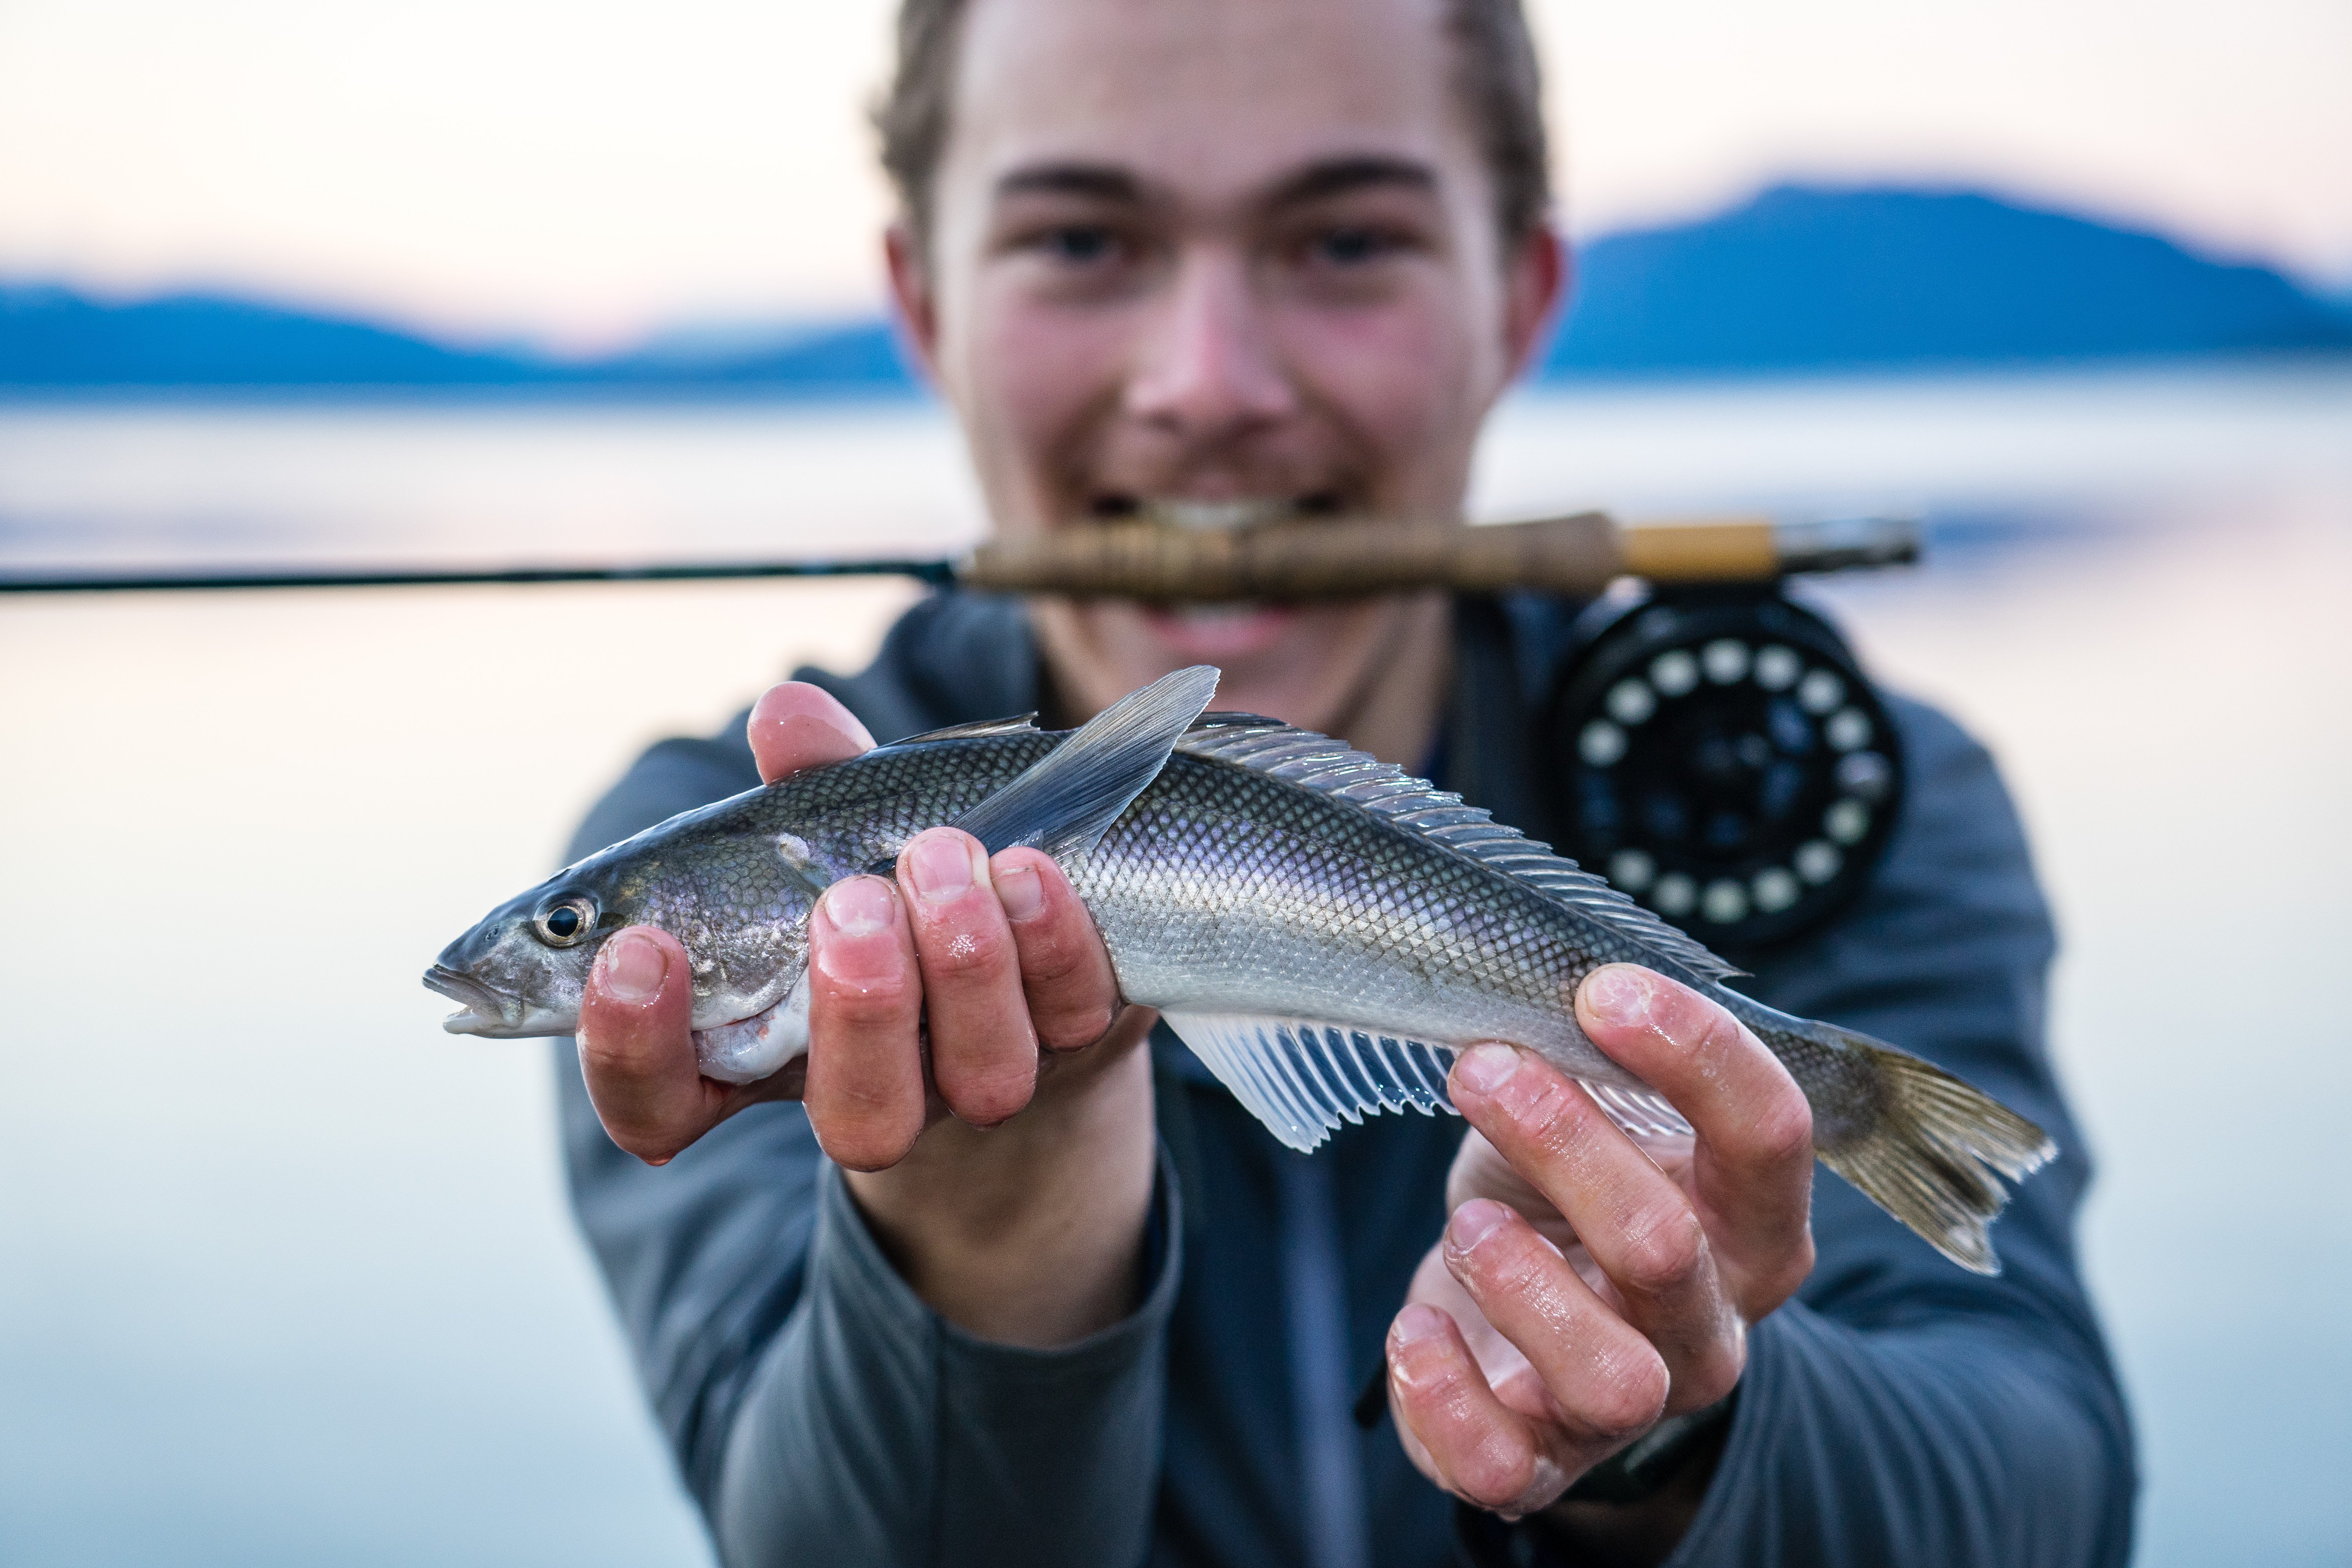 NOLS student holds a fishing rod in his teeth while showing off a freshly caught fish